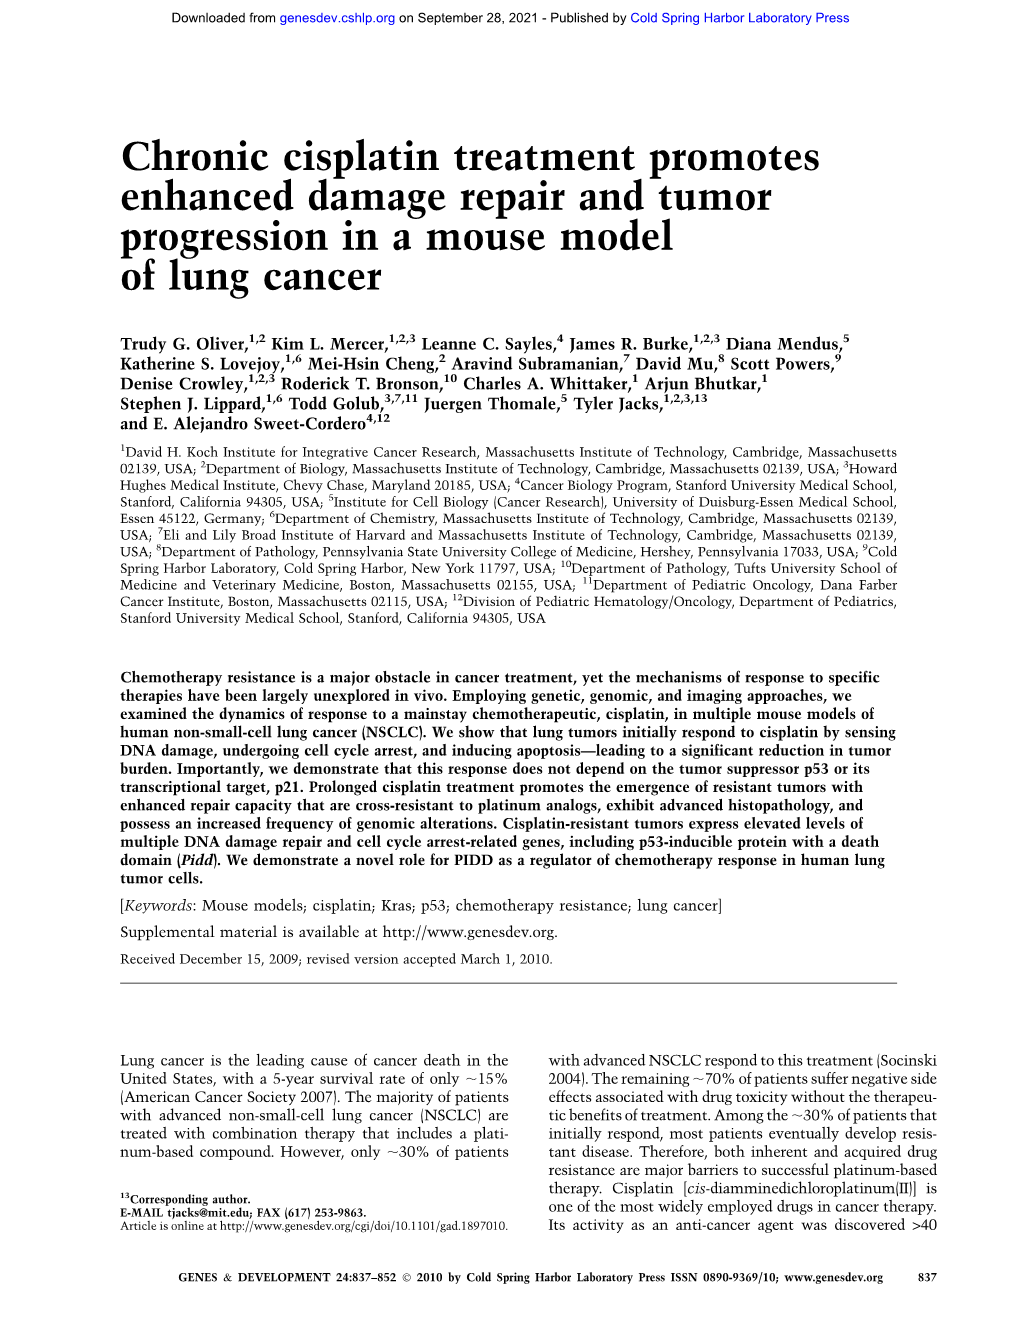 Chronic Cisplatin Treatment Promotes Enhanced Damage Repair and Tumor Progression in a Mouse Model of Lung Cancer